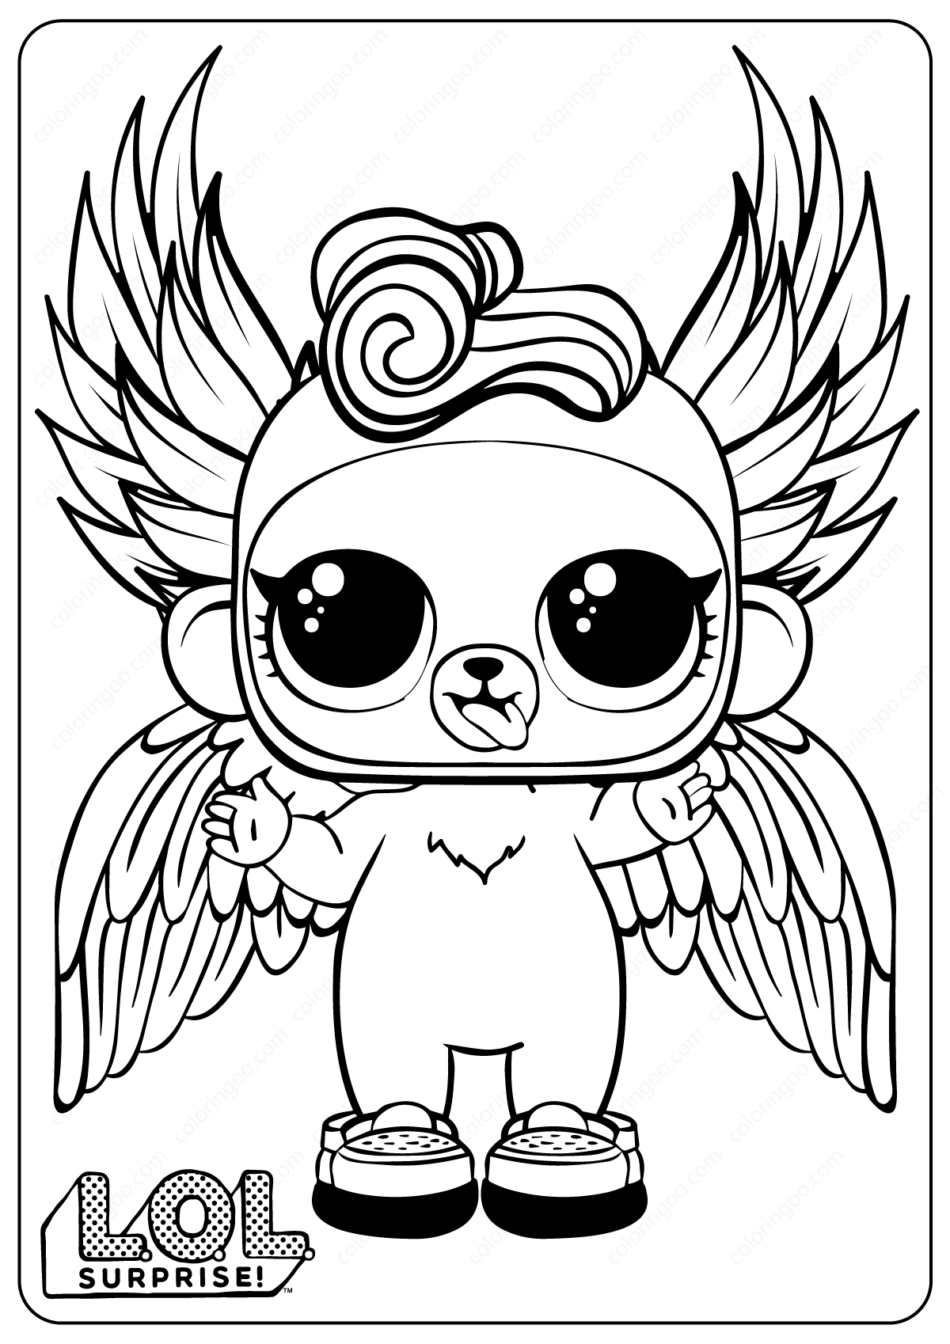 Lol Surprise Coloring Pages - Coloring Home